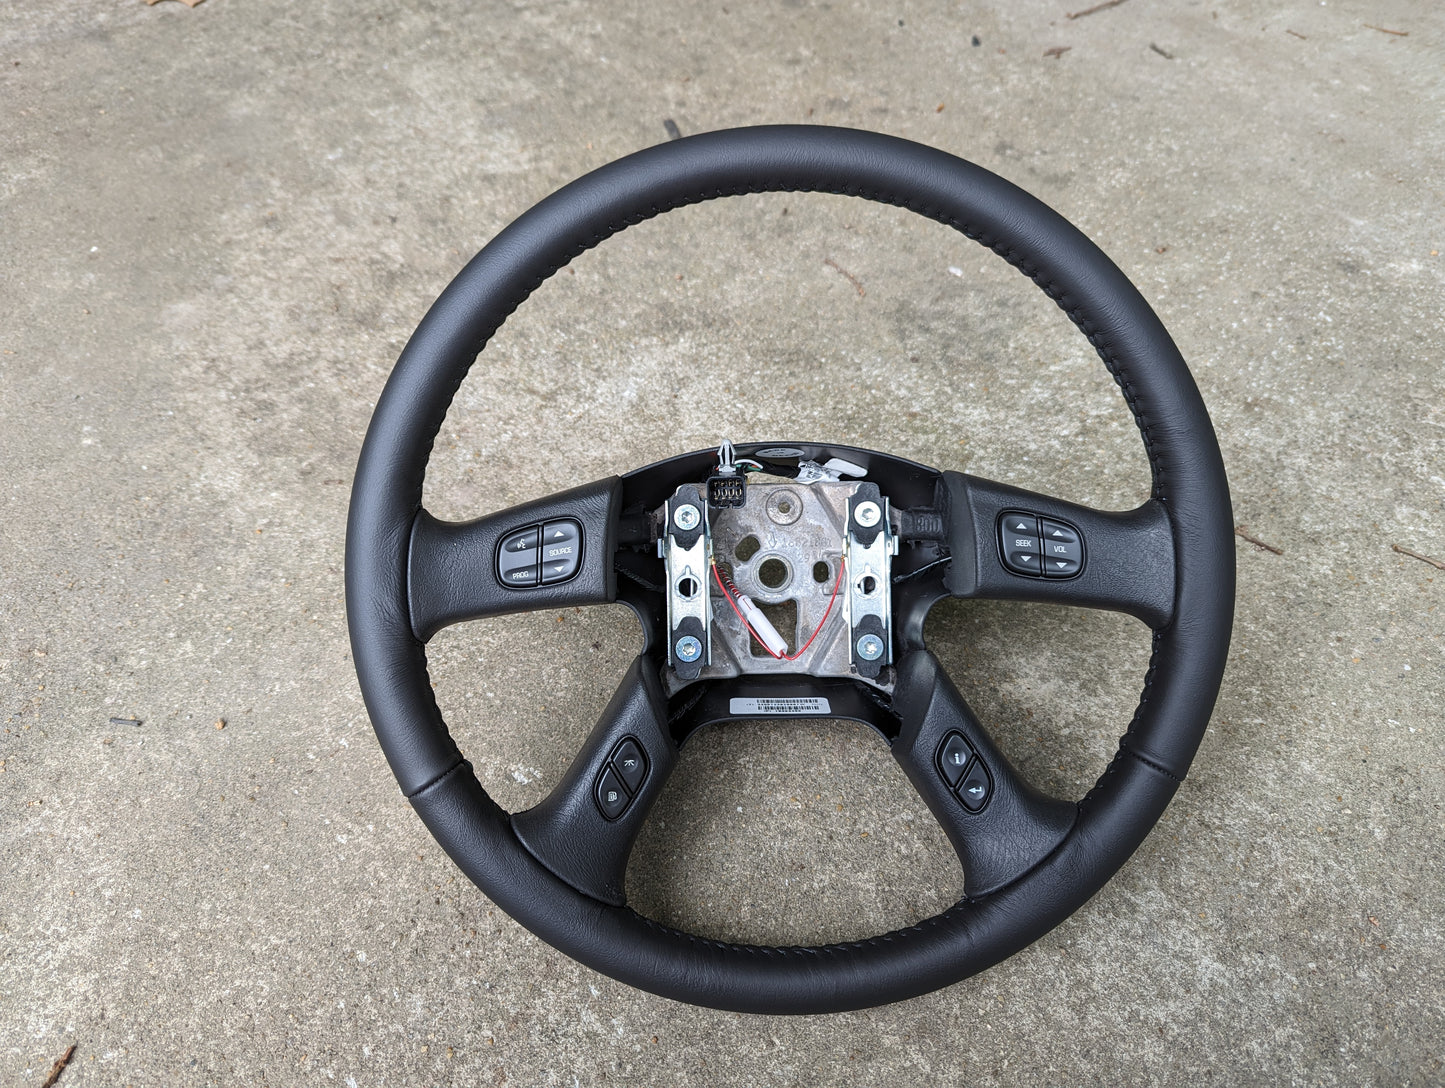 NEW Leather OEM Steering Wheel for 2002-2009 GM Chevy Silverado Trailblazer and more